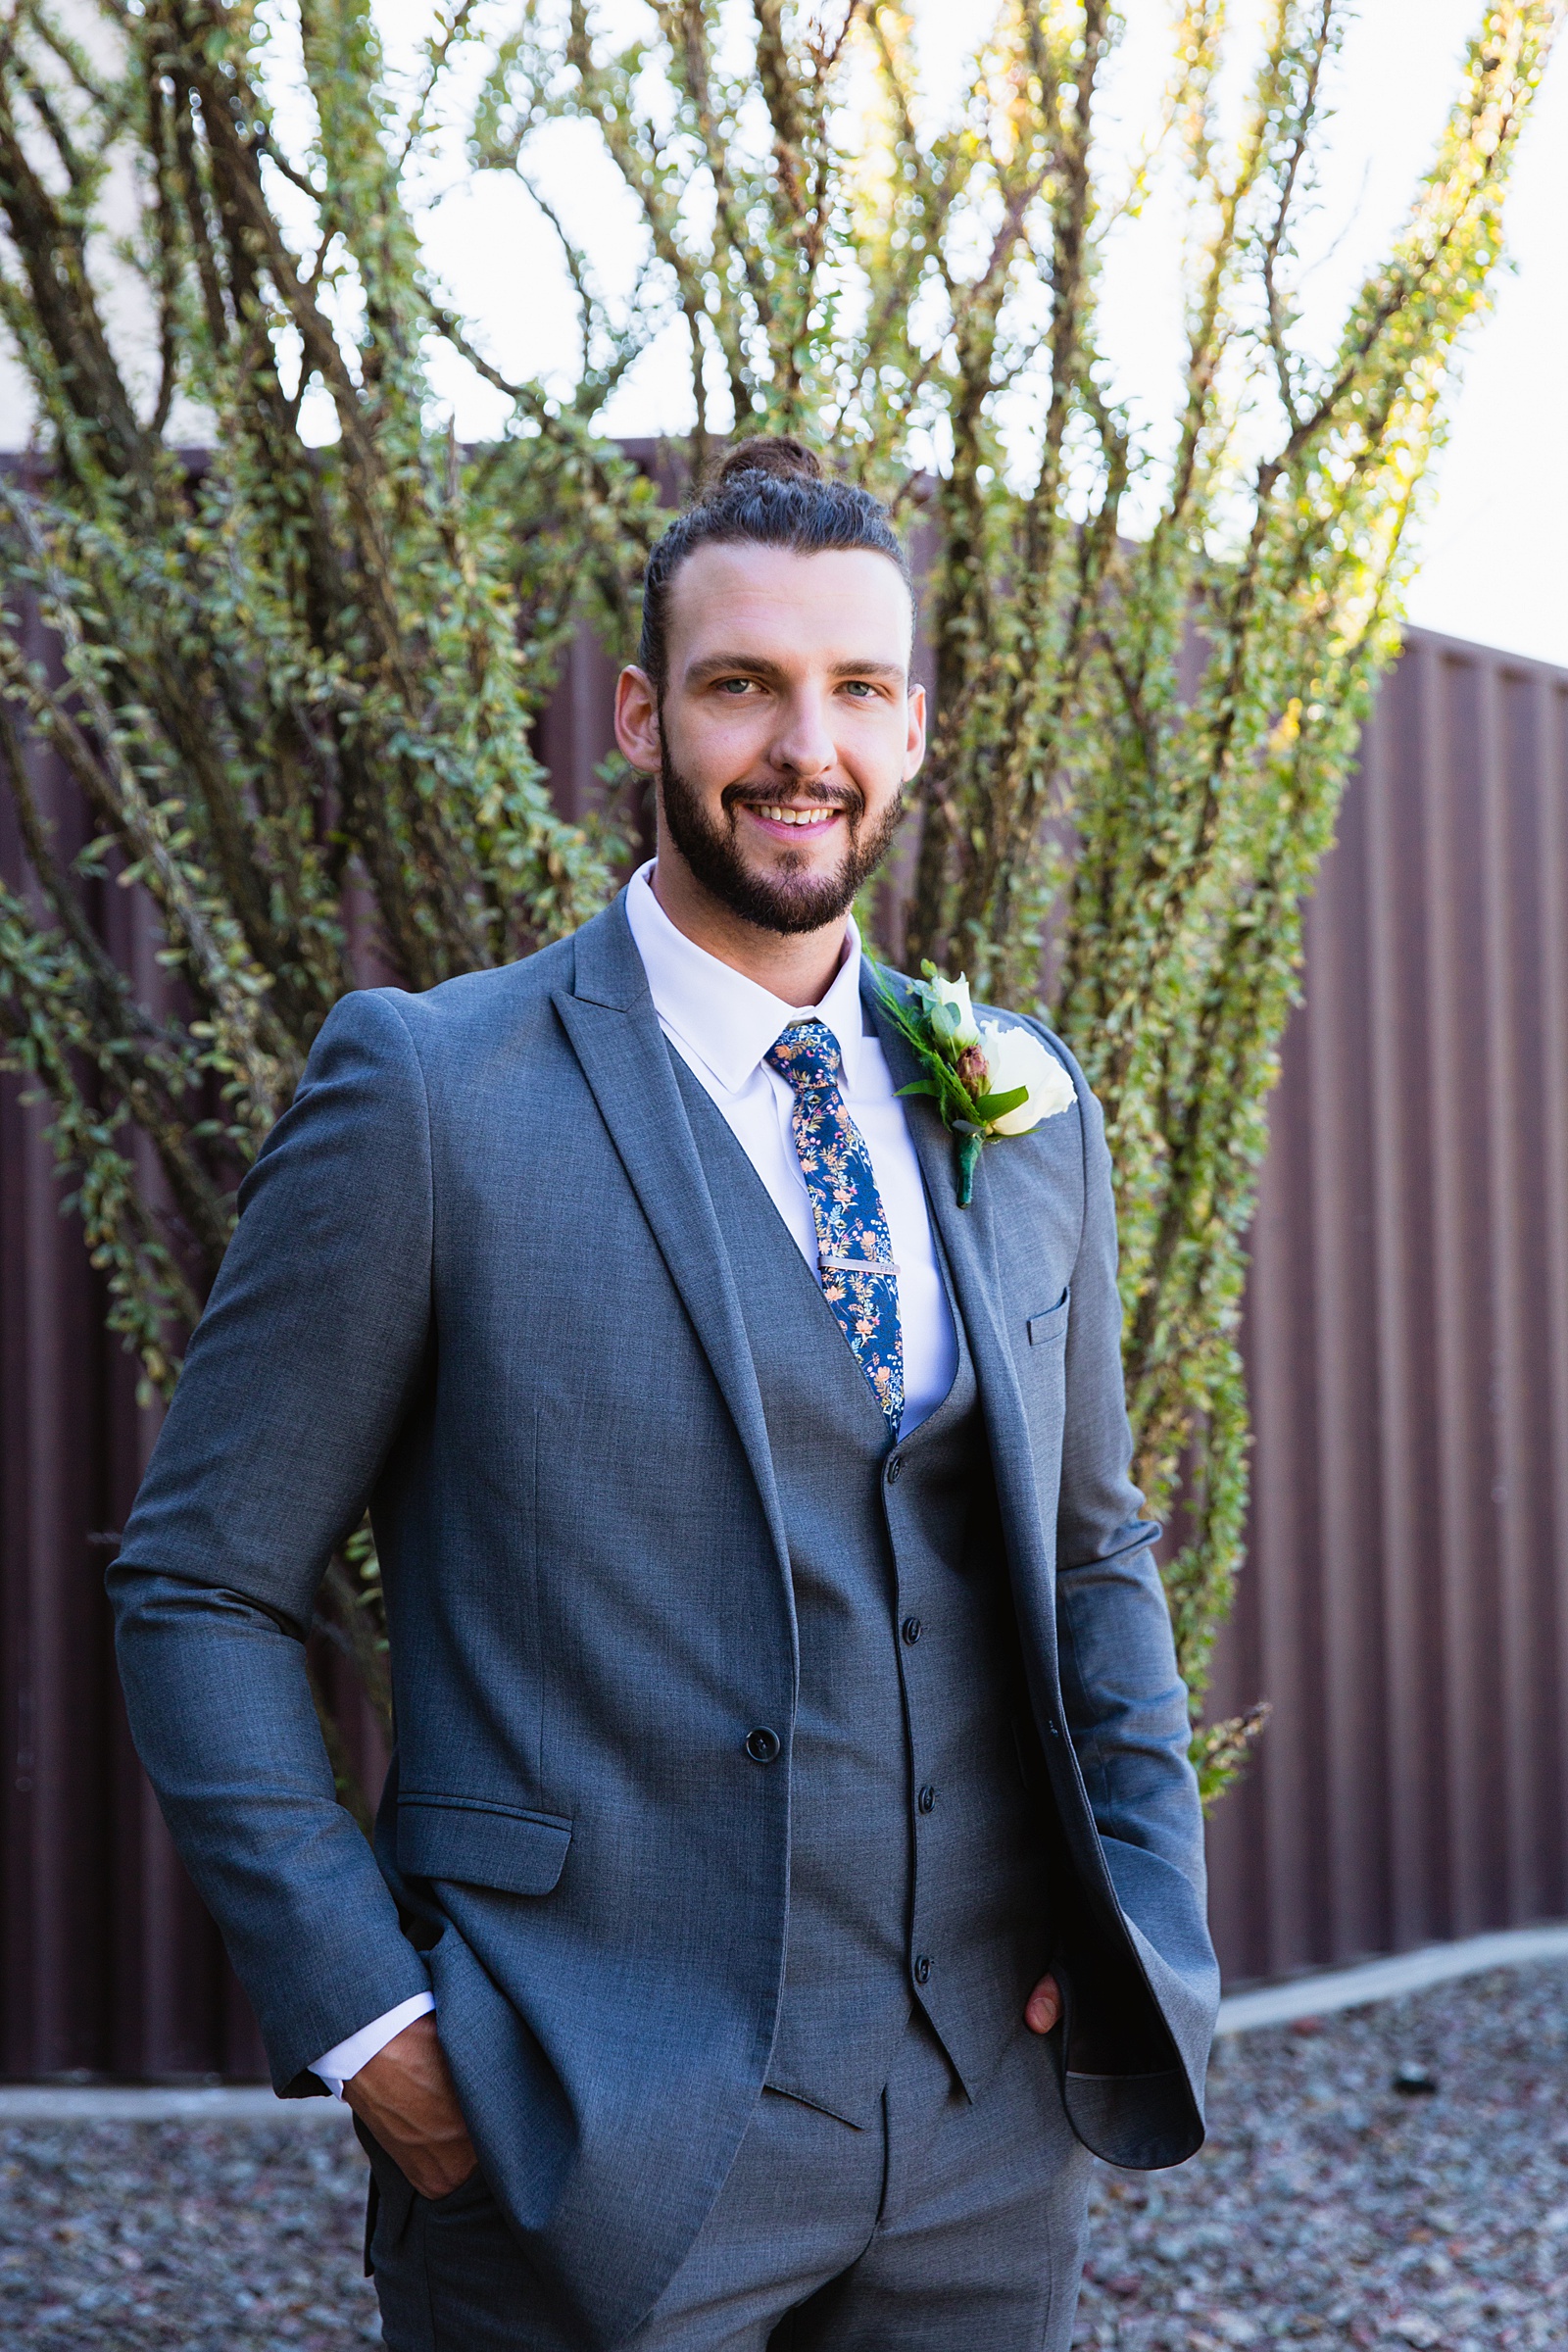 Groom's grey suit with floral tie for his Papago Events wedding by PMA Photography.